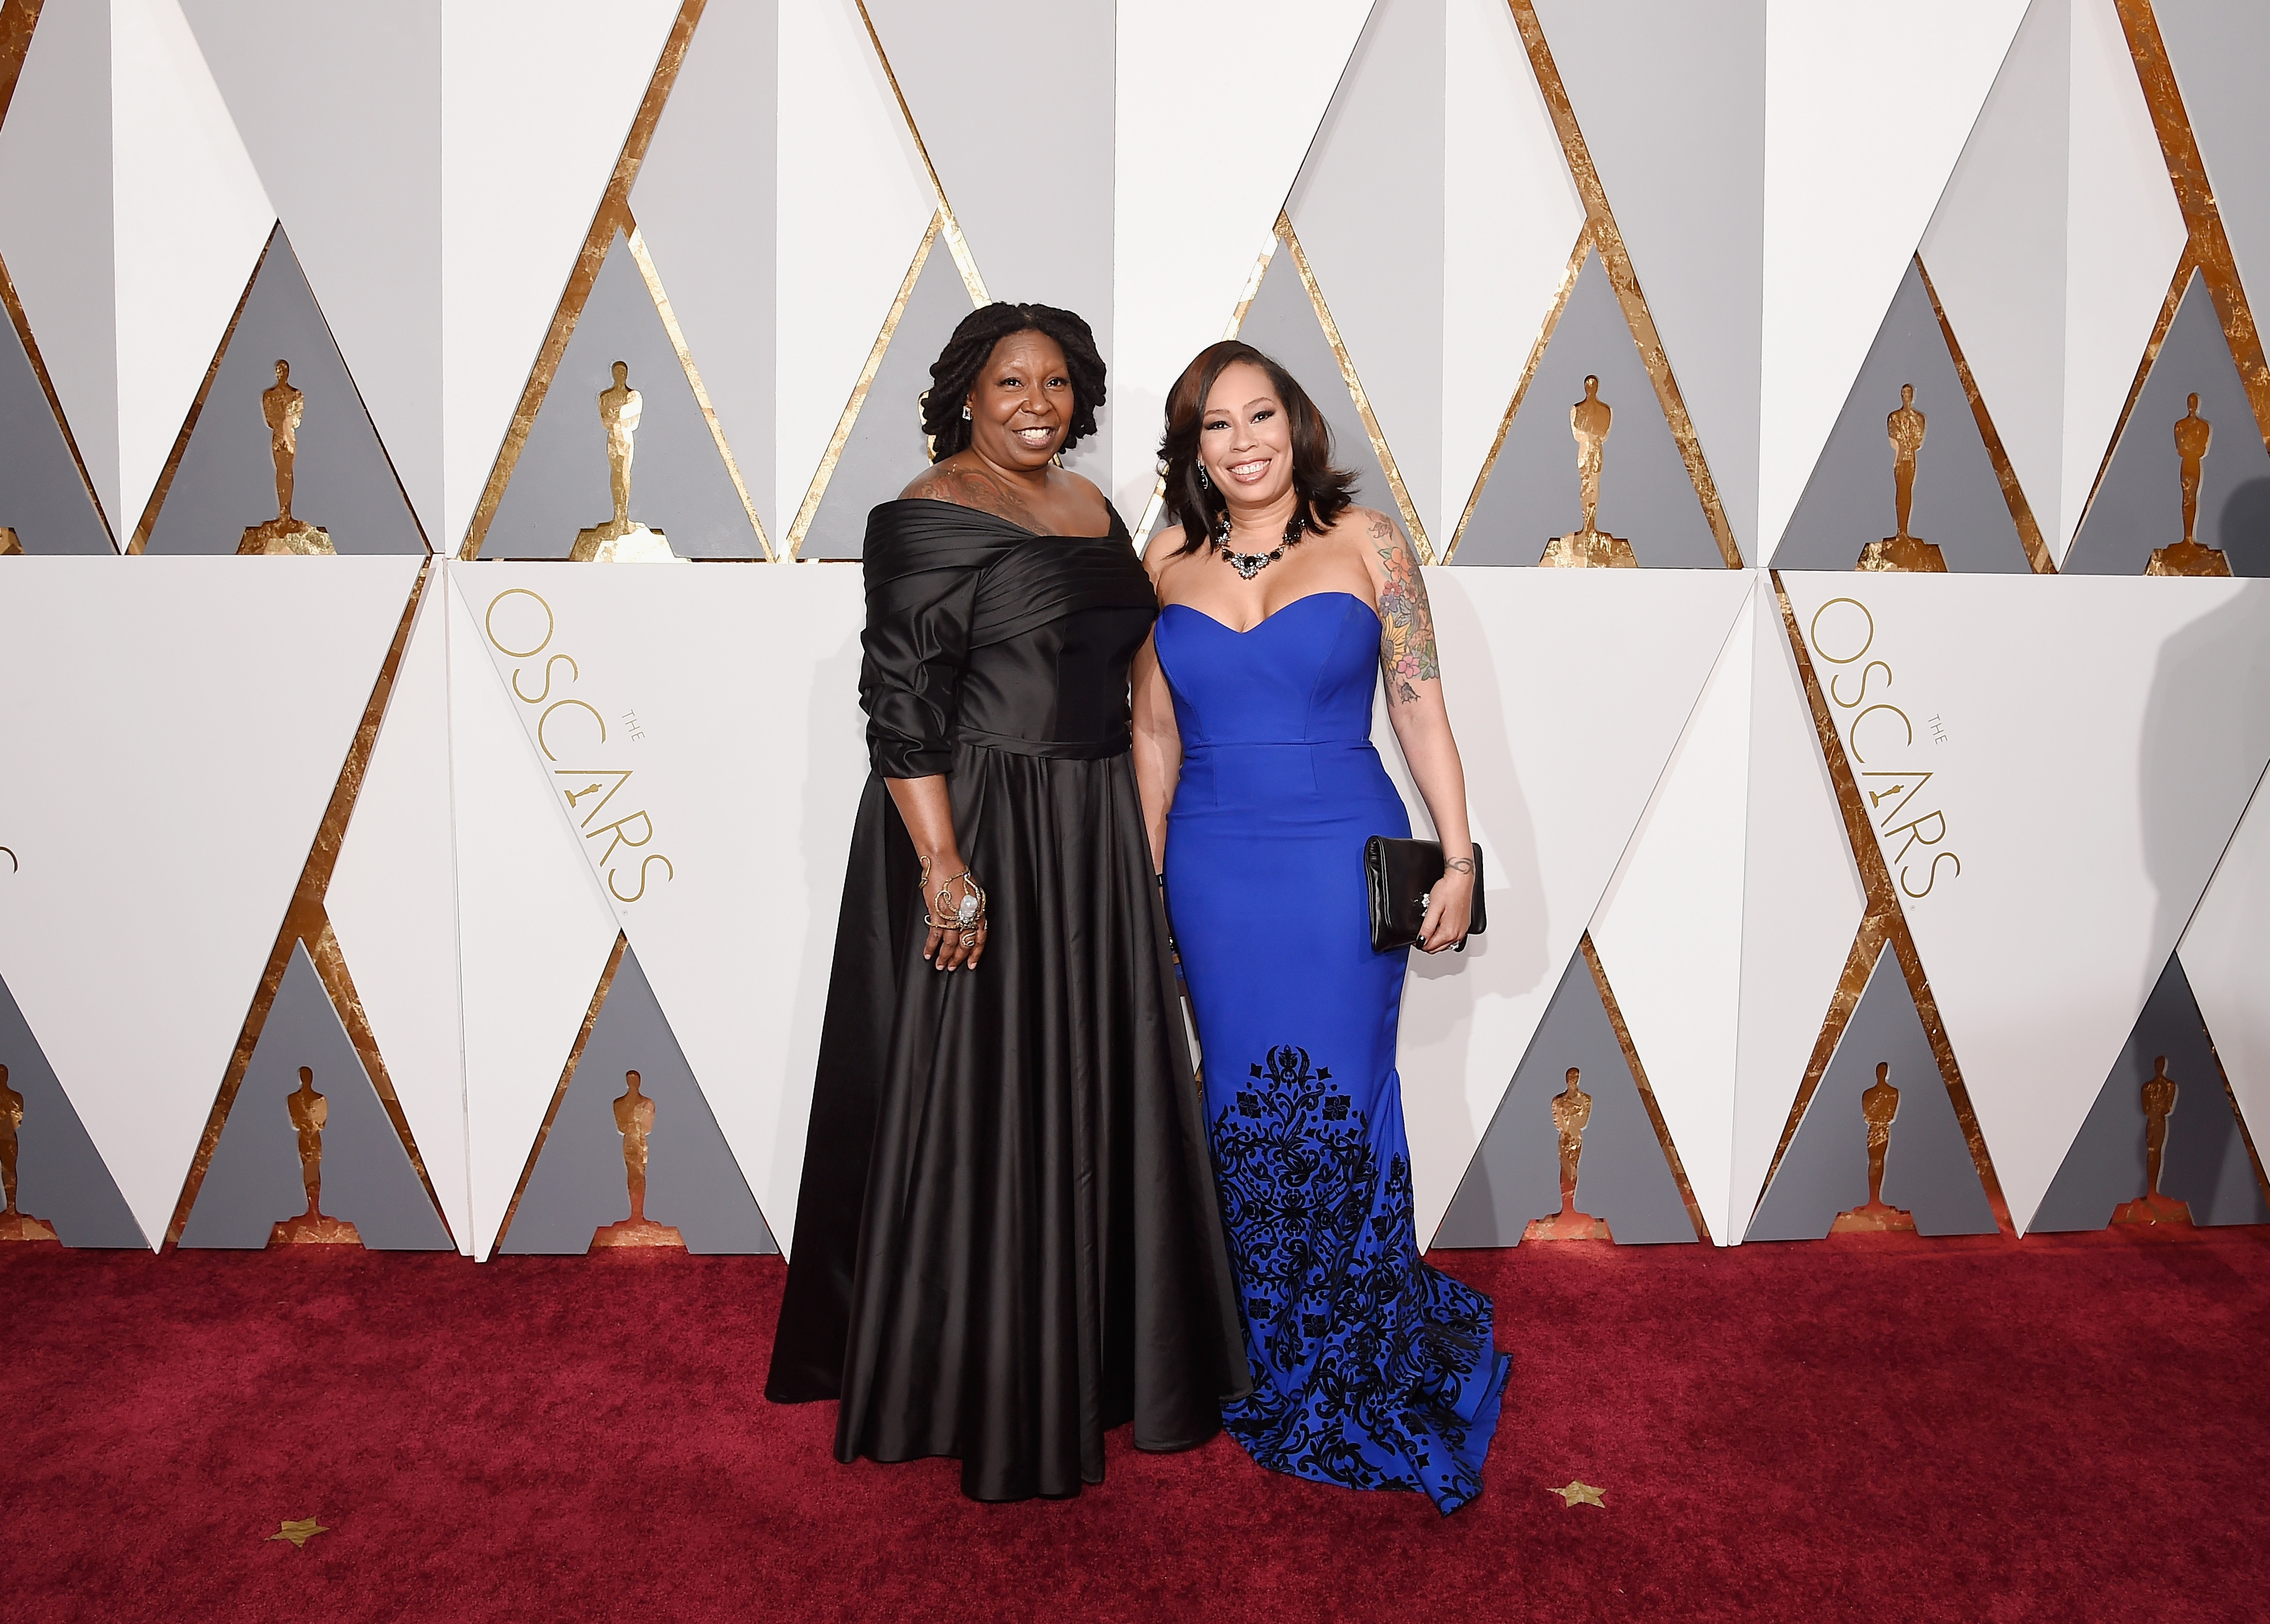 Alex Martin accompanied her mother at the 88th Annual Academy Awards in Hollywood in 2016